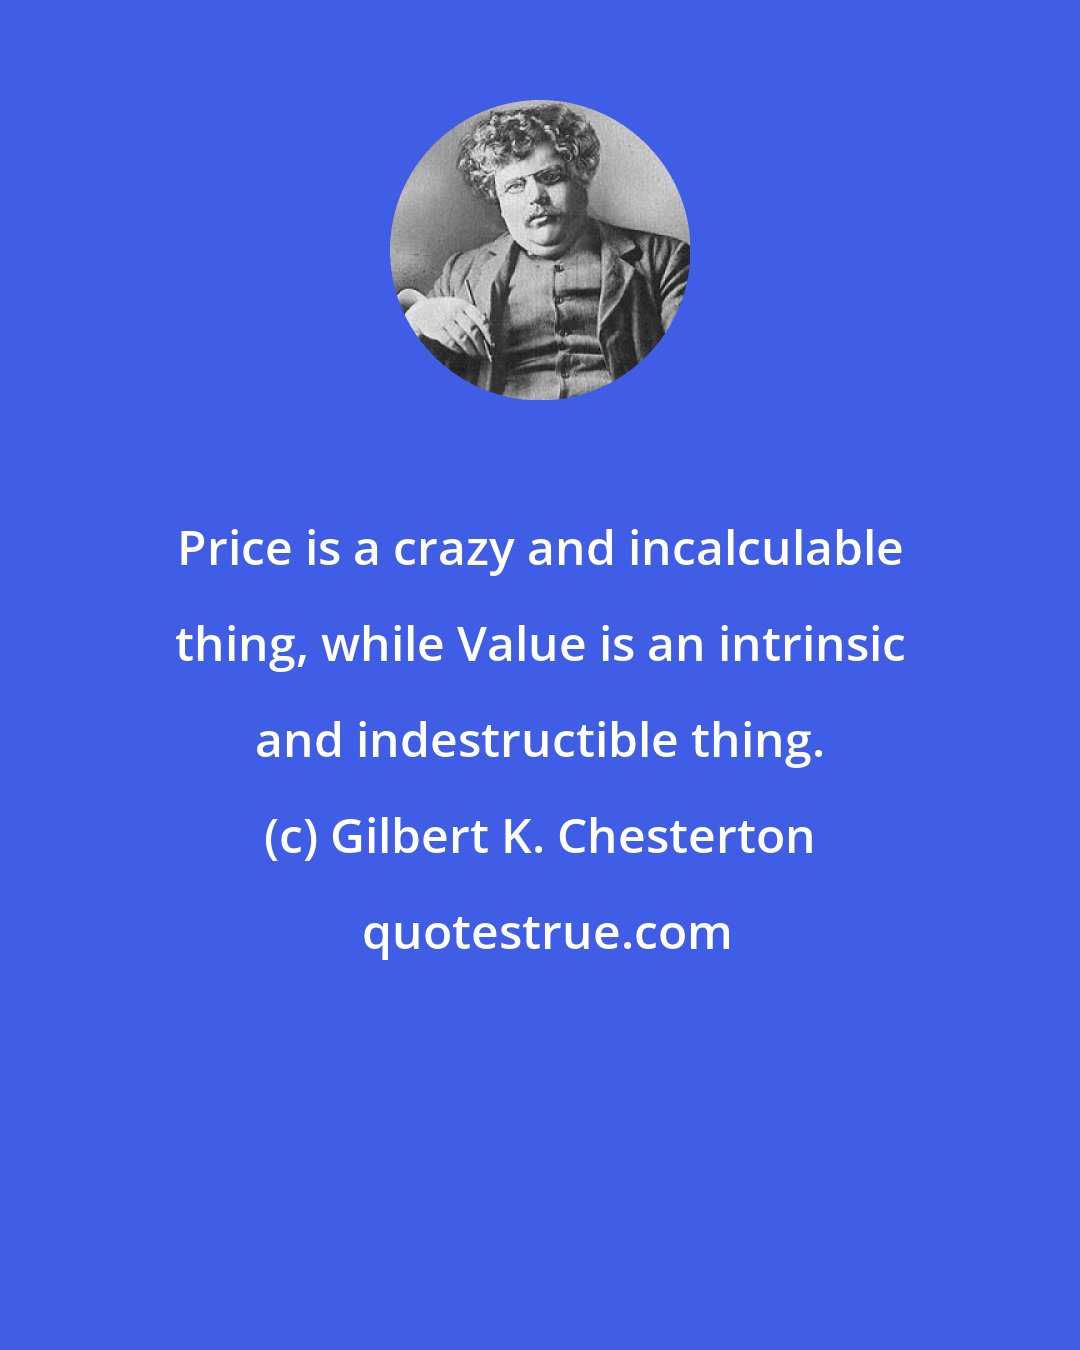 Gilbert K. Chesterton: Price is a crazy and incalculable thing, while Value is an intrinsic and indestructible thing.